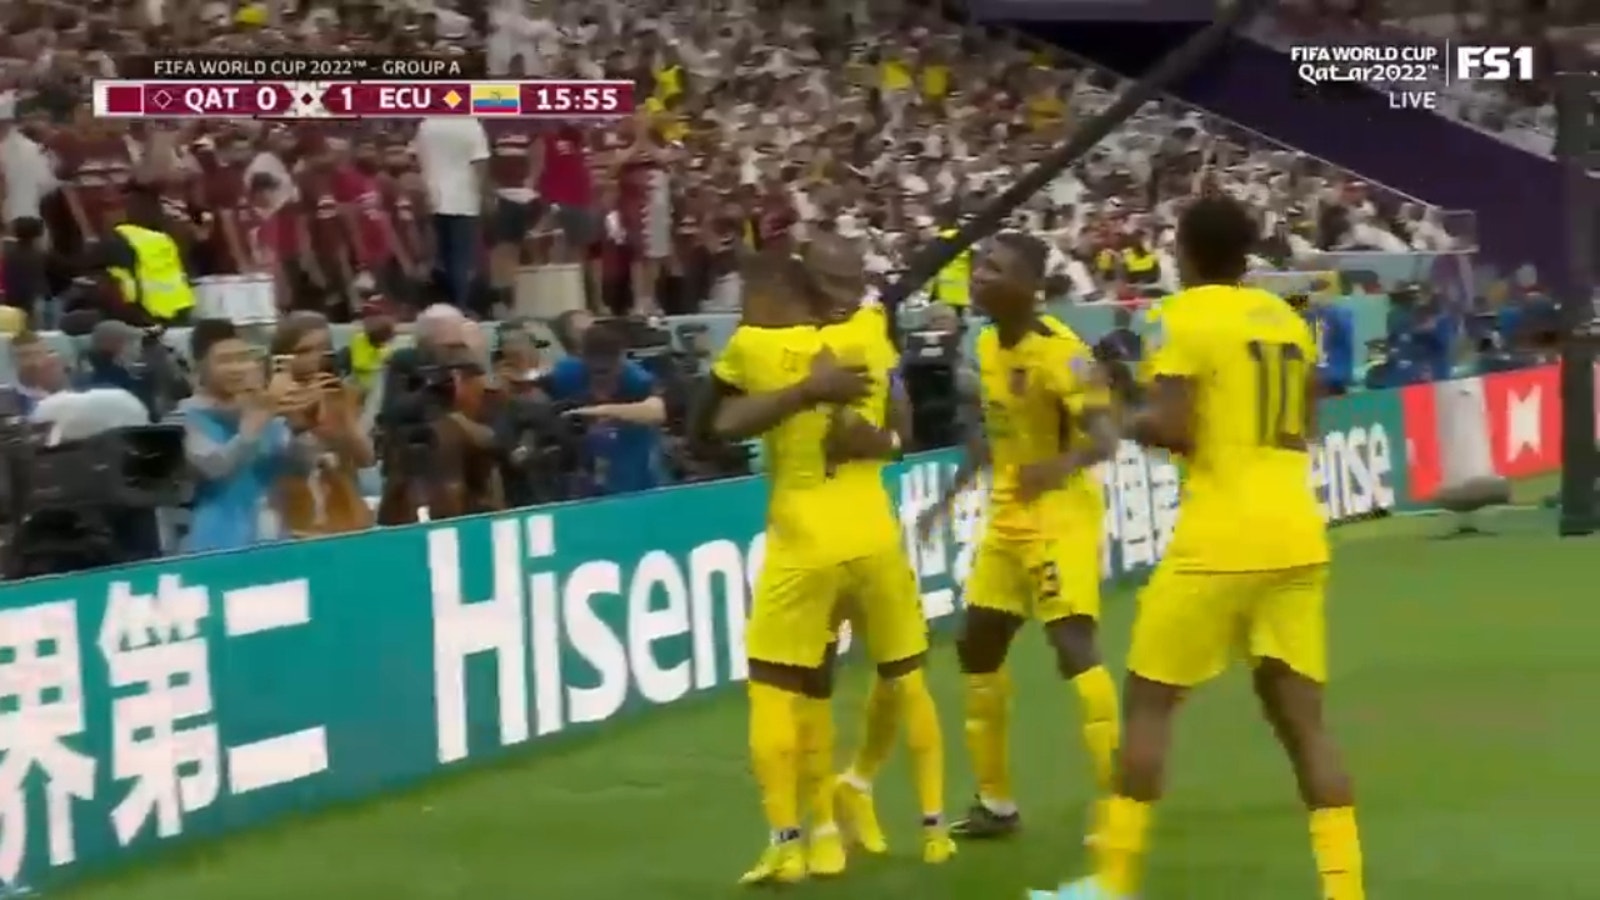 Ecuador's Ener Valencia is fouled in the box and scores a PK against Qatar. 